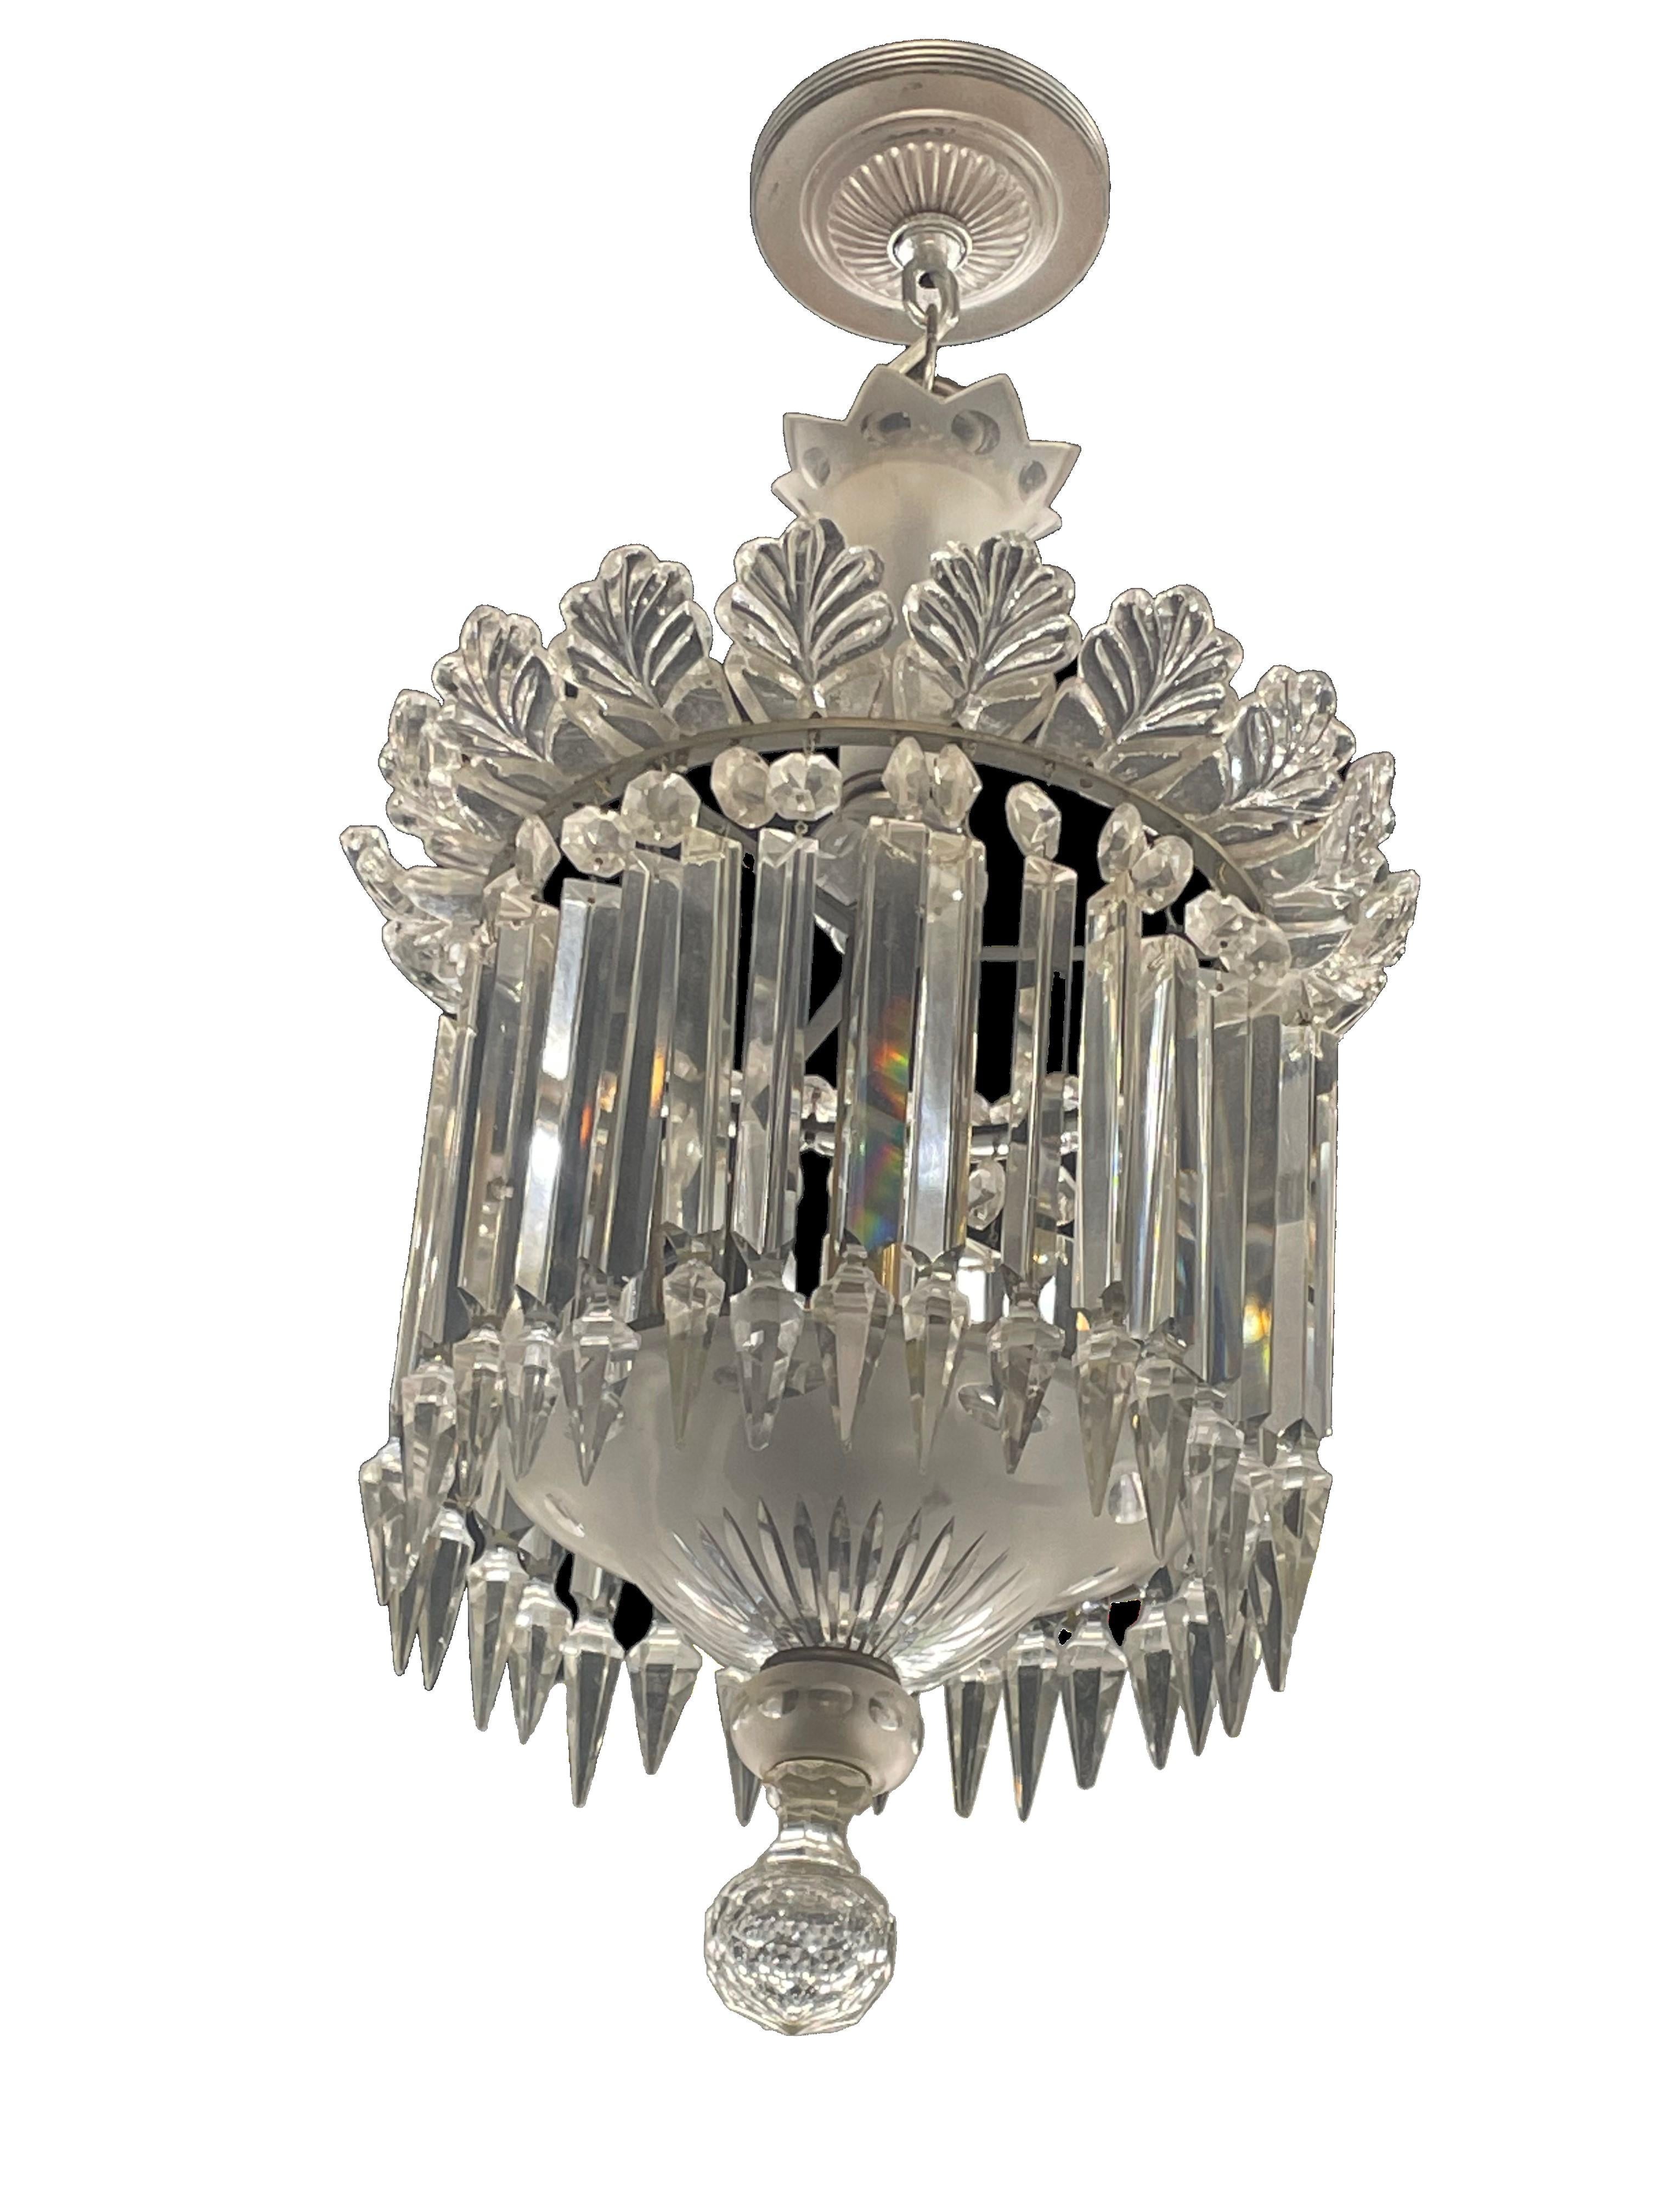 Slim Waterford Lustre crystals hang in a tight-knit, layered configuration, reminiscent of a wedding cake. A trim chandelier that adds simple elegance to any room.